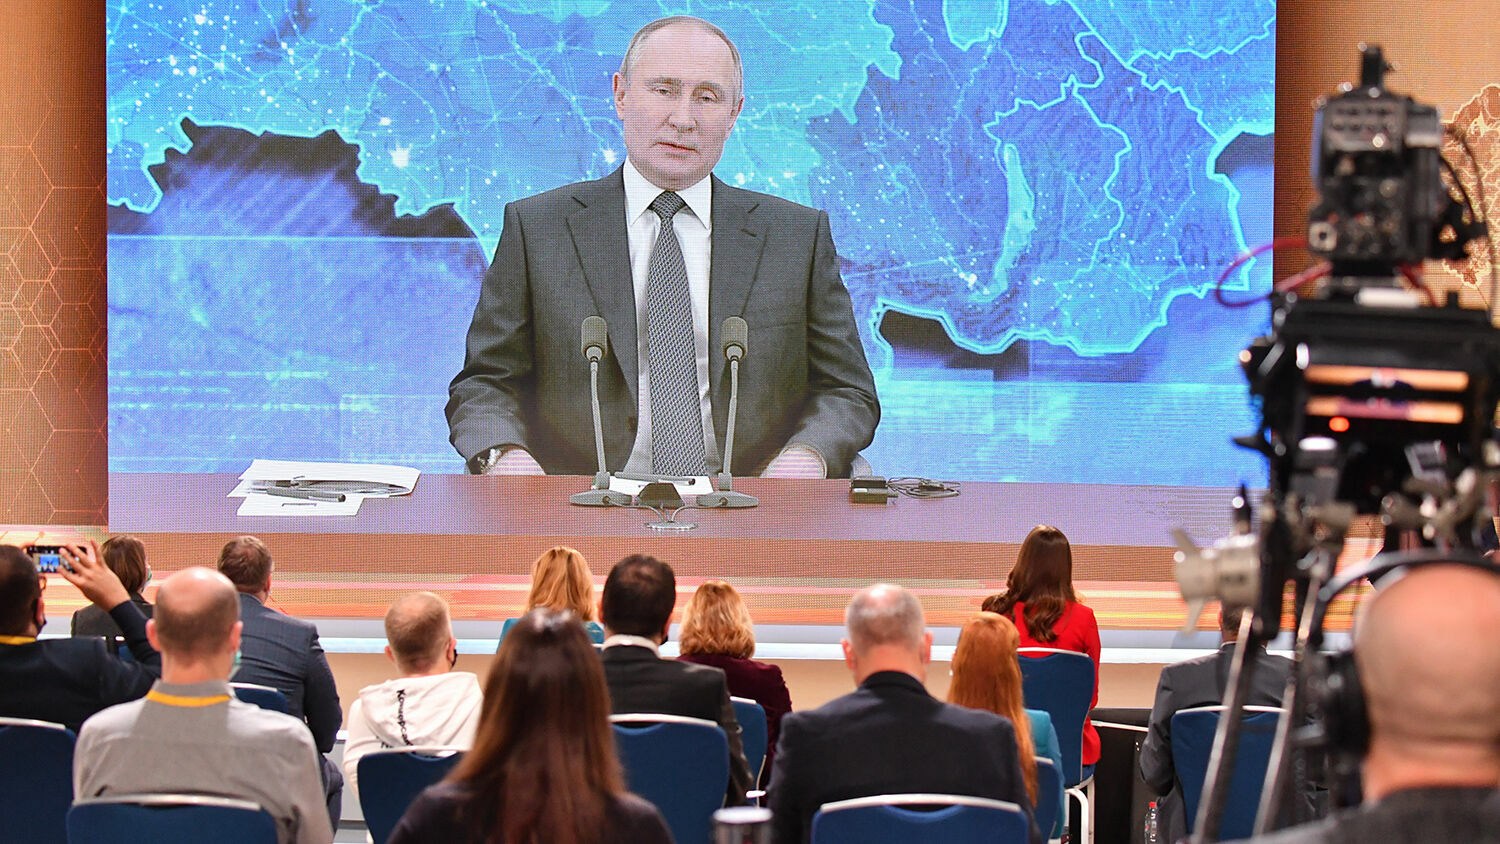 "The show is gone, the conversation remains": political analysts assessed Putin's press conference